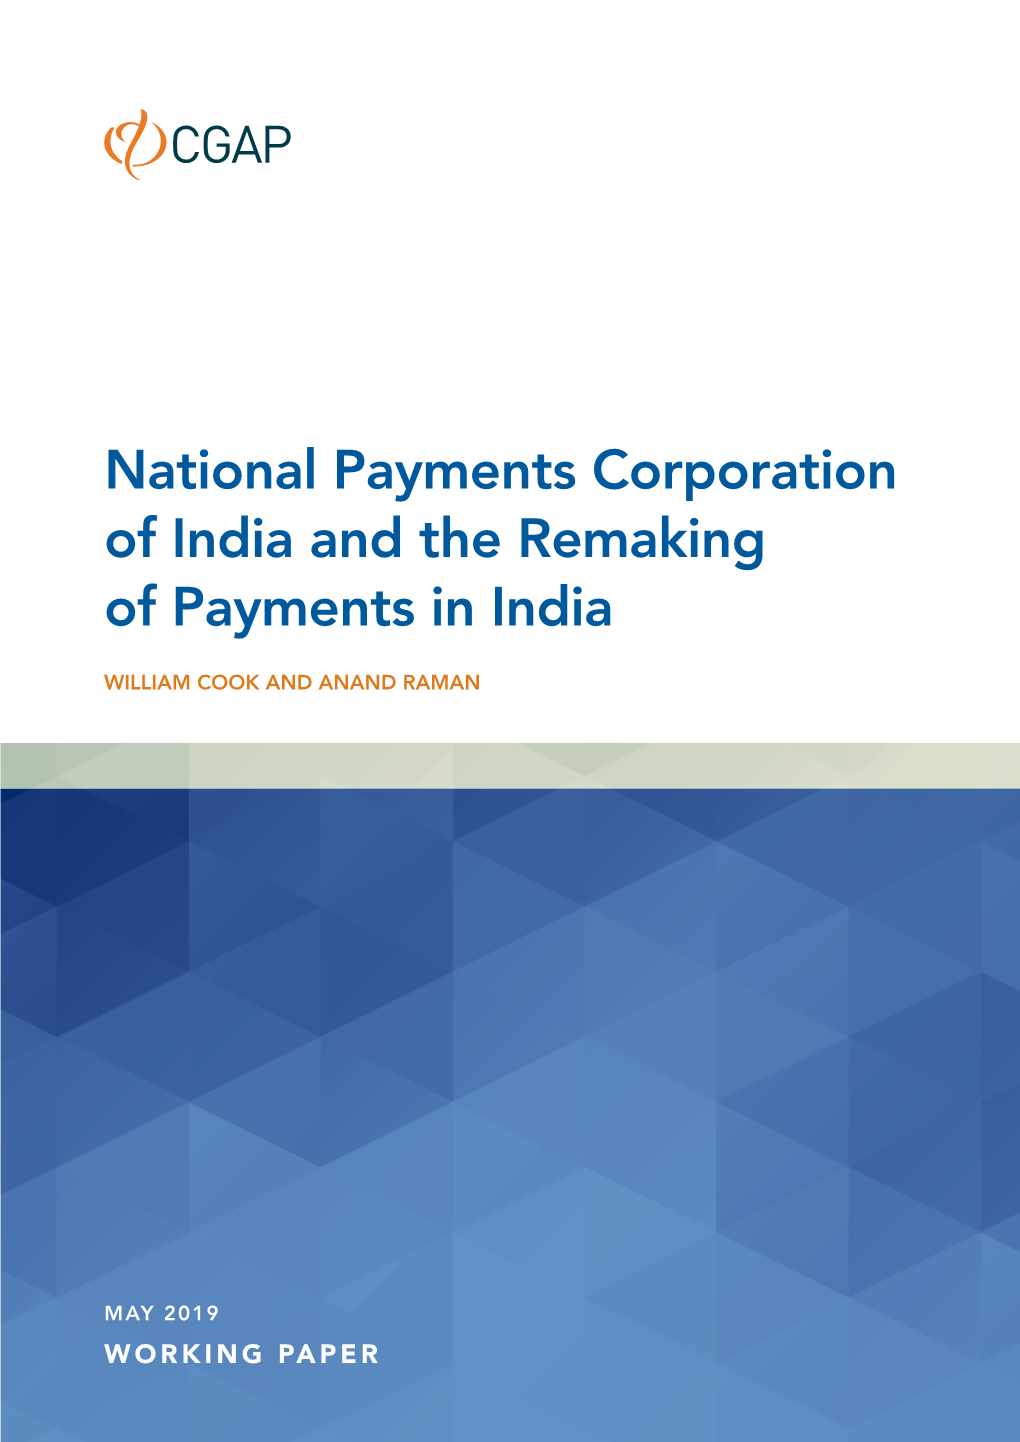 National Payments Corporation of India and the Remaking of Payments in India